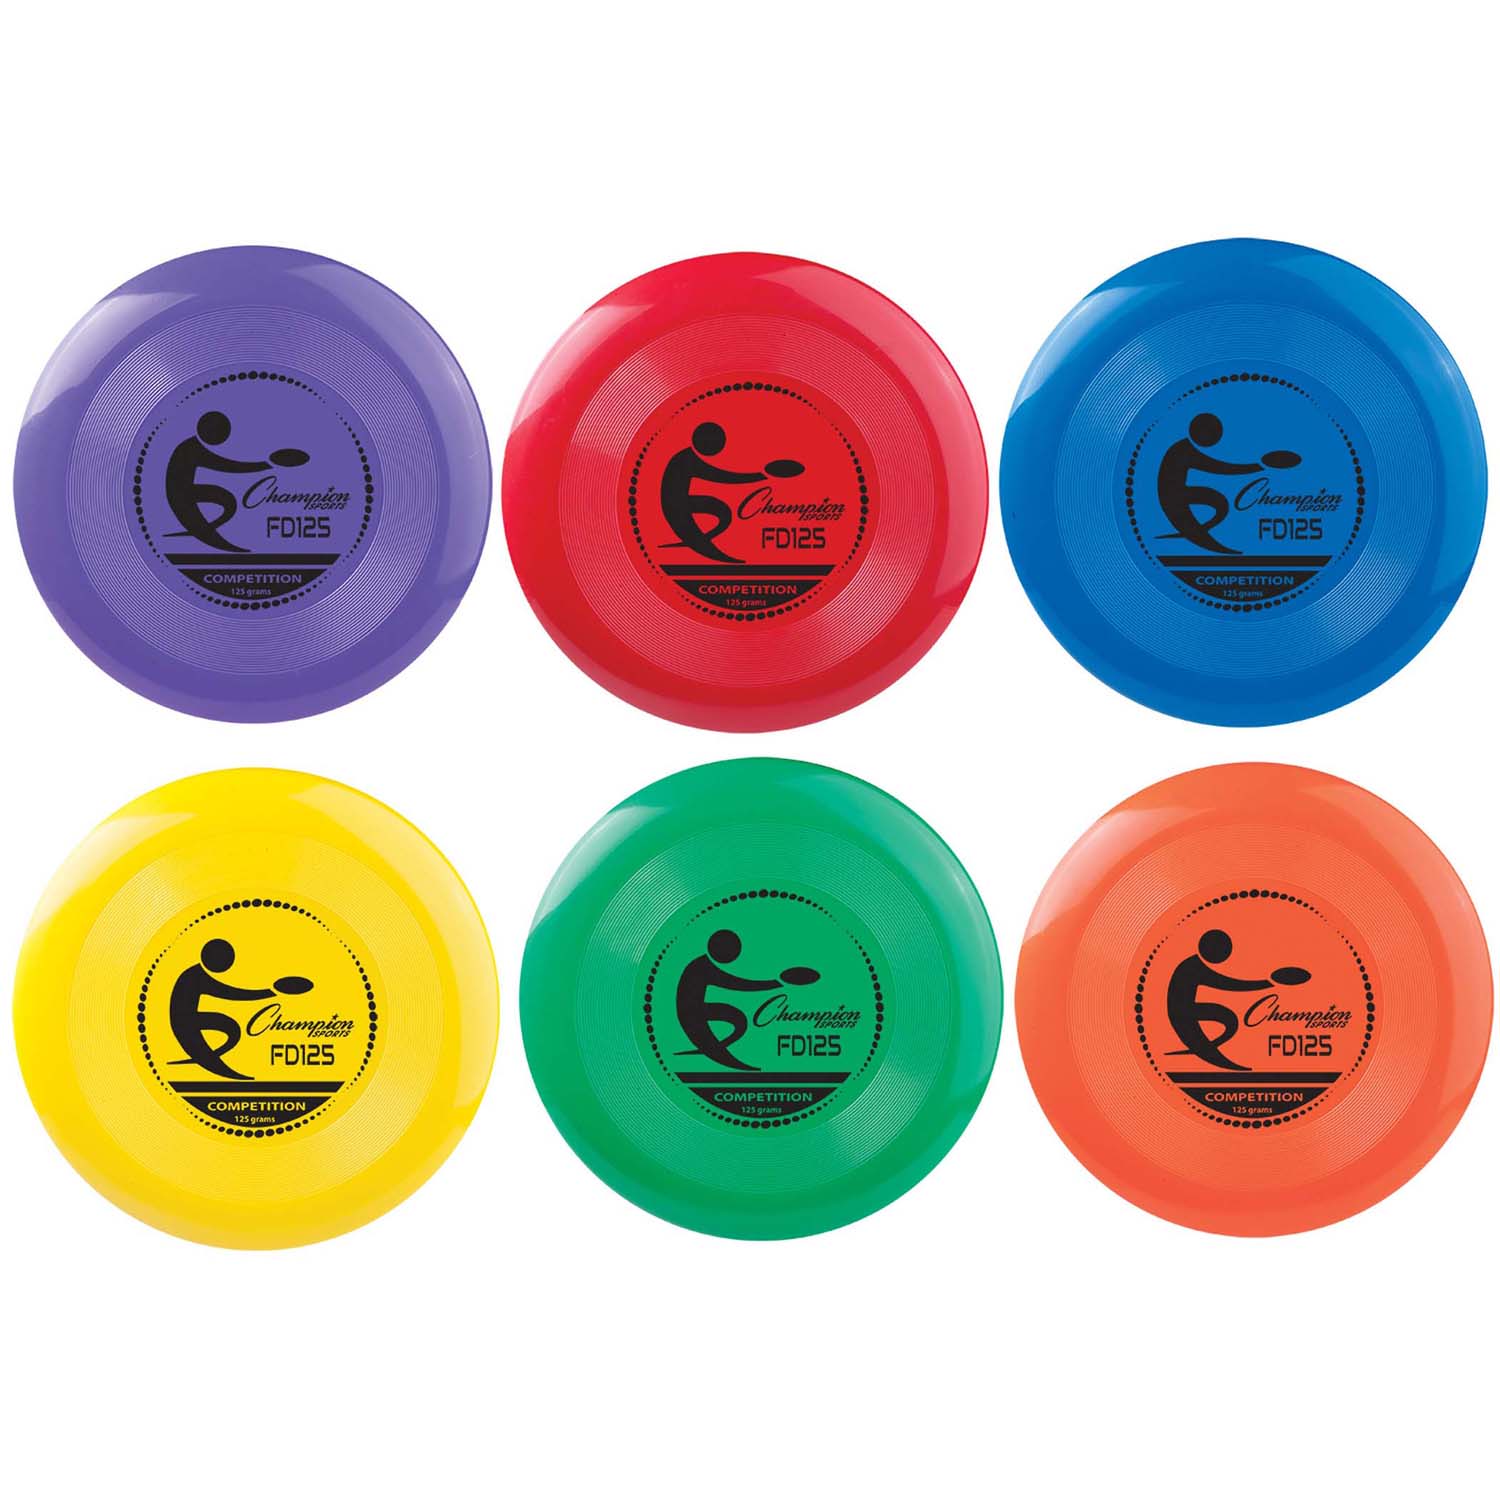 Plastic Disc, 125g, Assorted Colors, Pack of 6